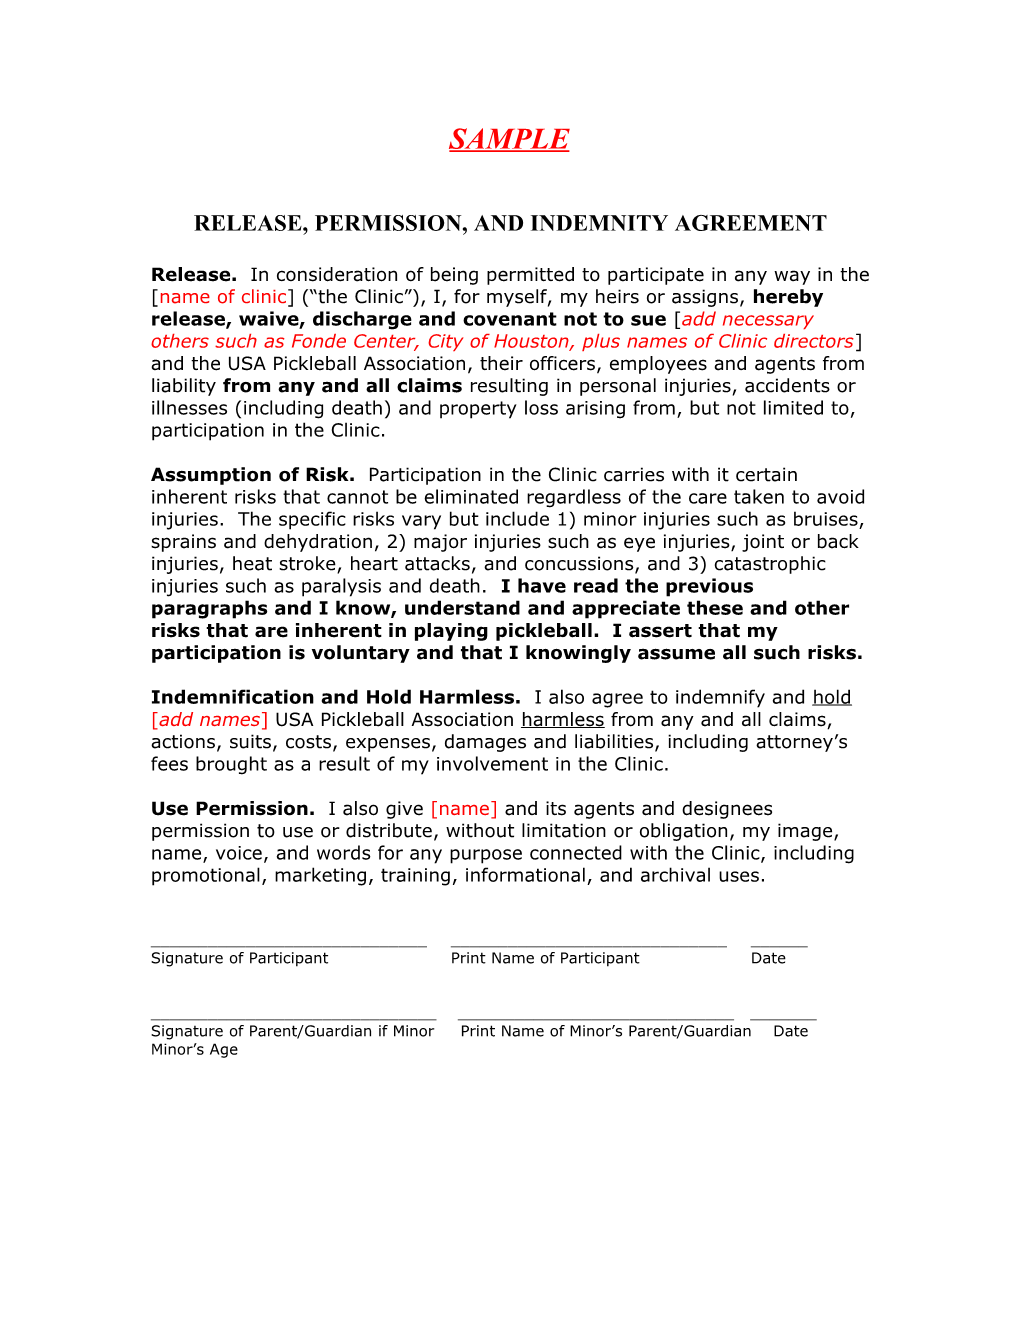 Release, Permission, and Indemnity Agreement